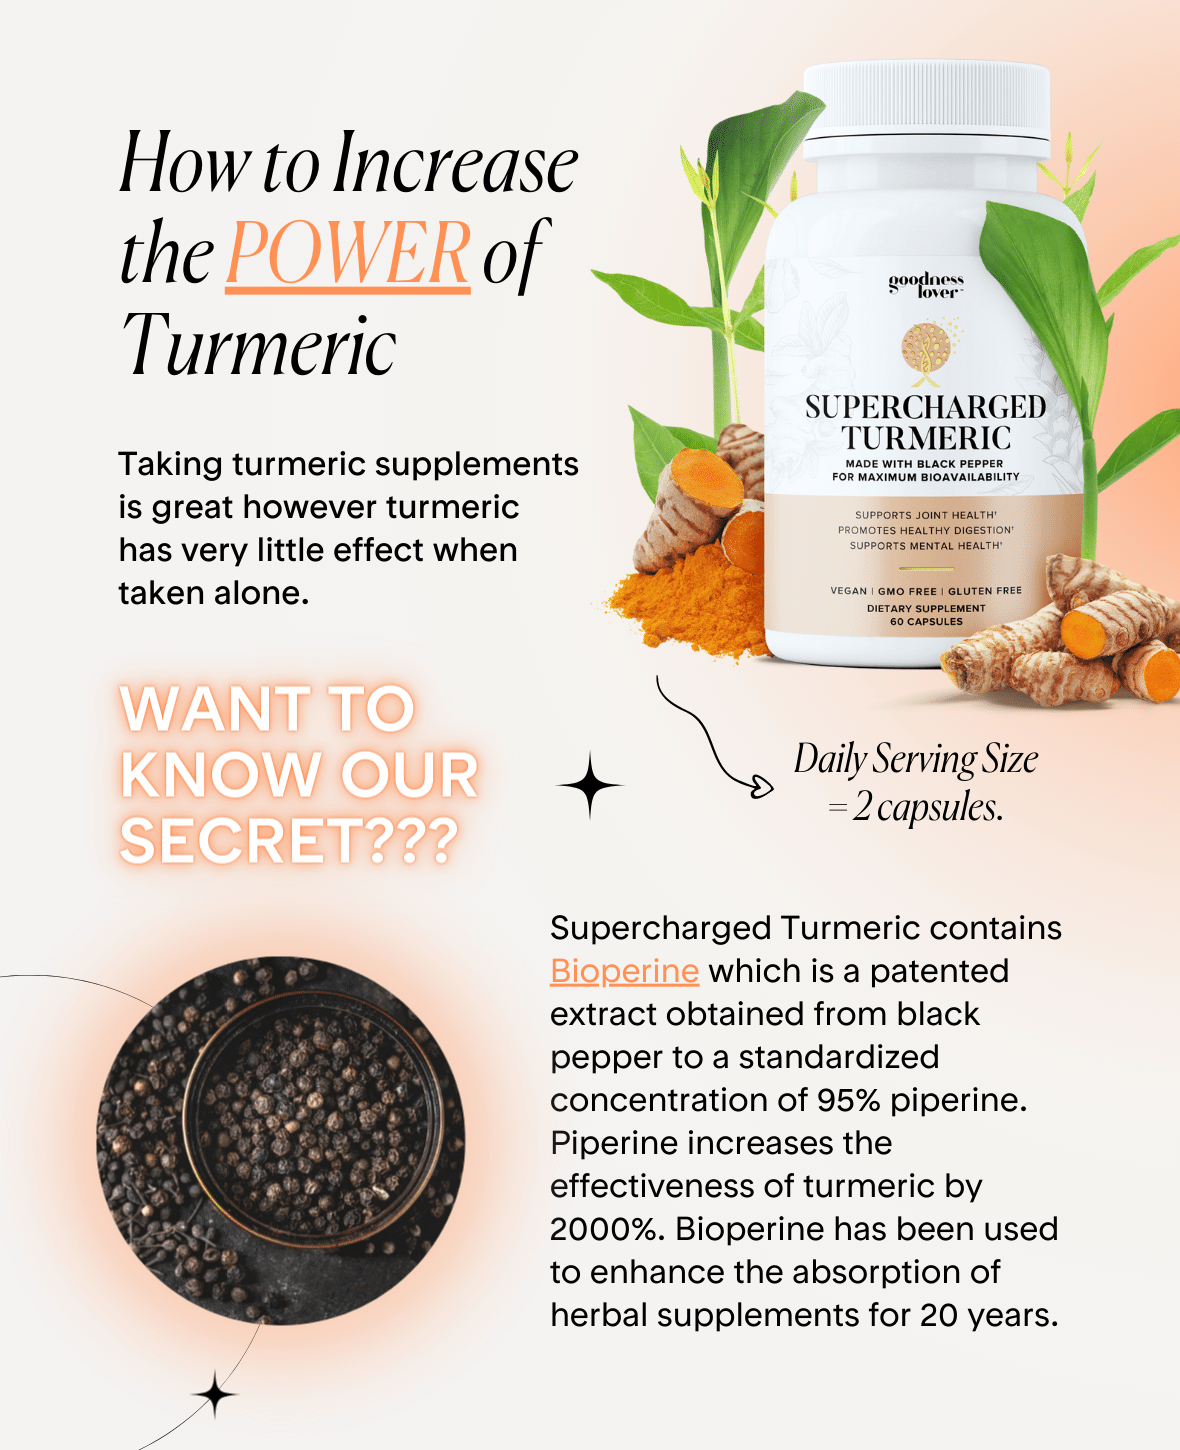 Supercharged Turmeric